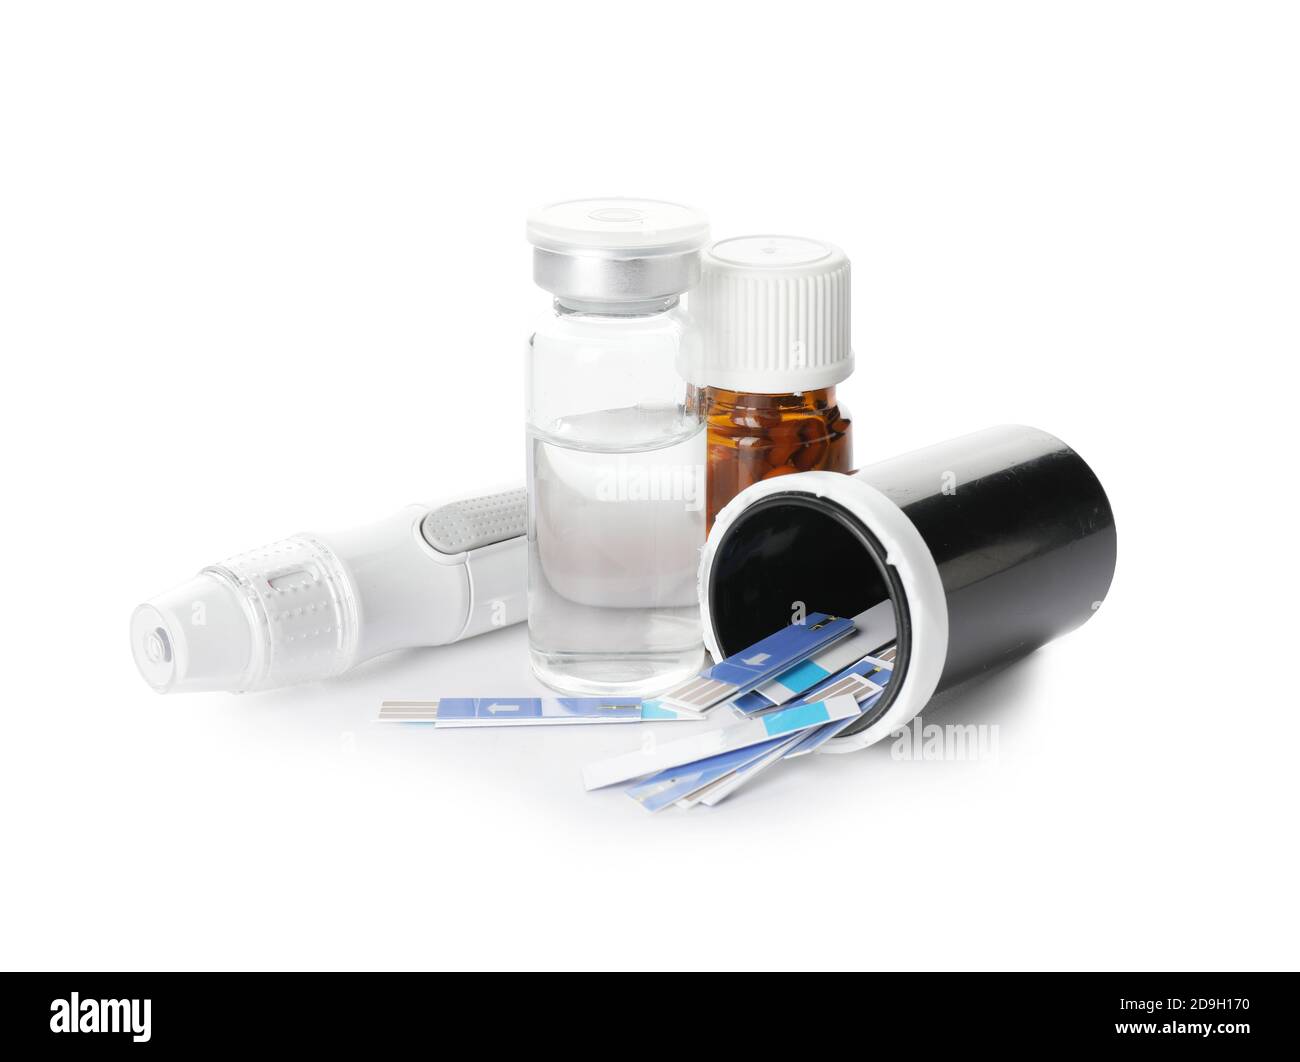 Bottle of insulin, test strips for glucometer and lancet pen on white background. Diabetes concept Stock Photo